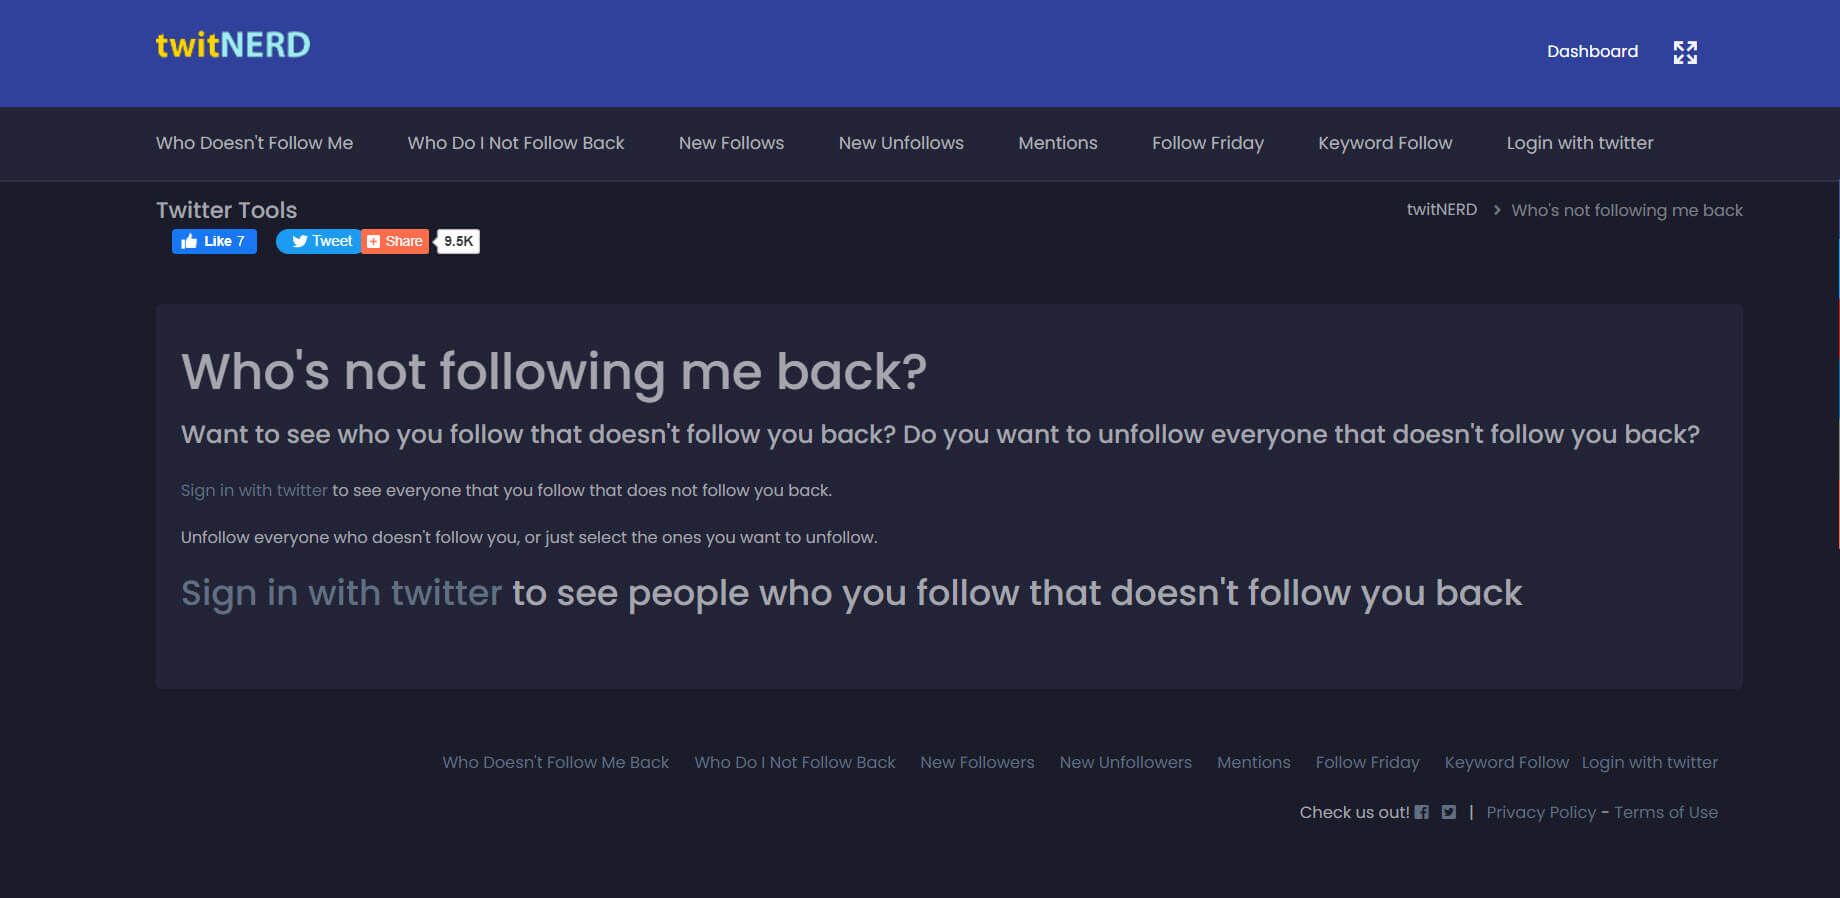 TwitNerd's dashboard with Who's not following me back on Twitter